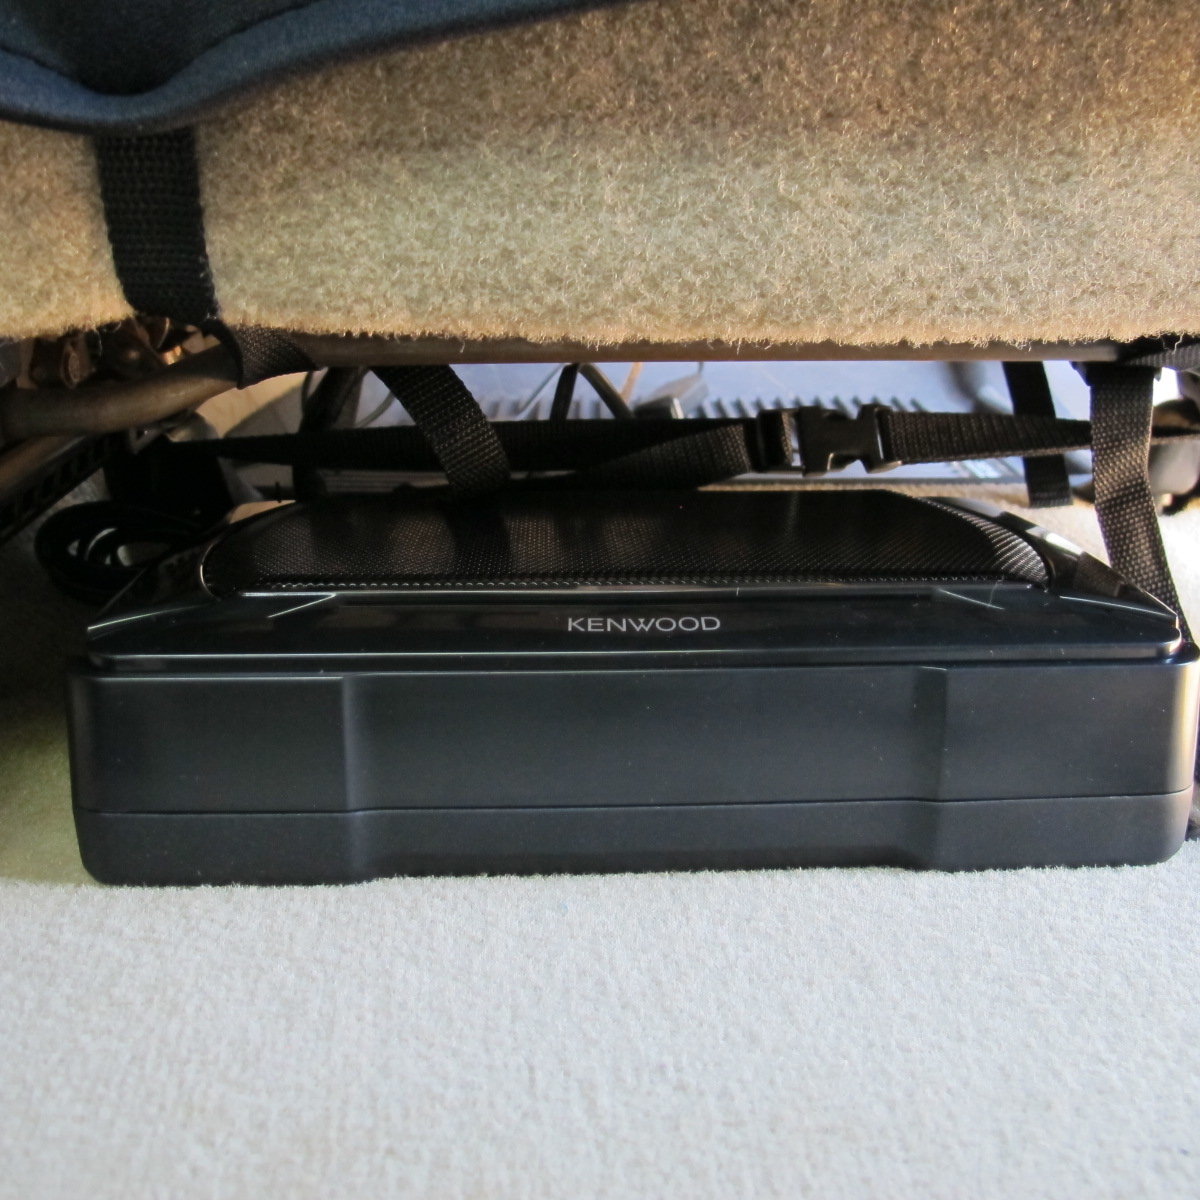 Low cost stereo upgrade | Toyota Tundra Forum